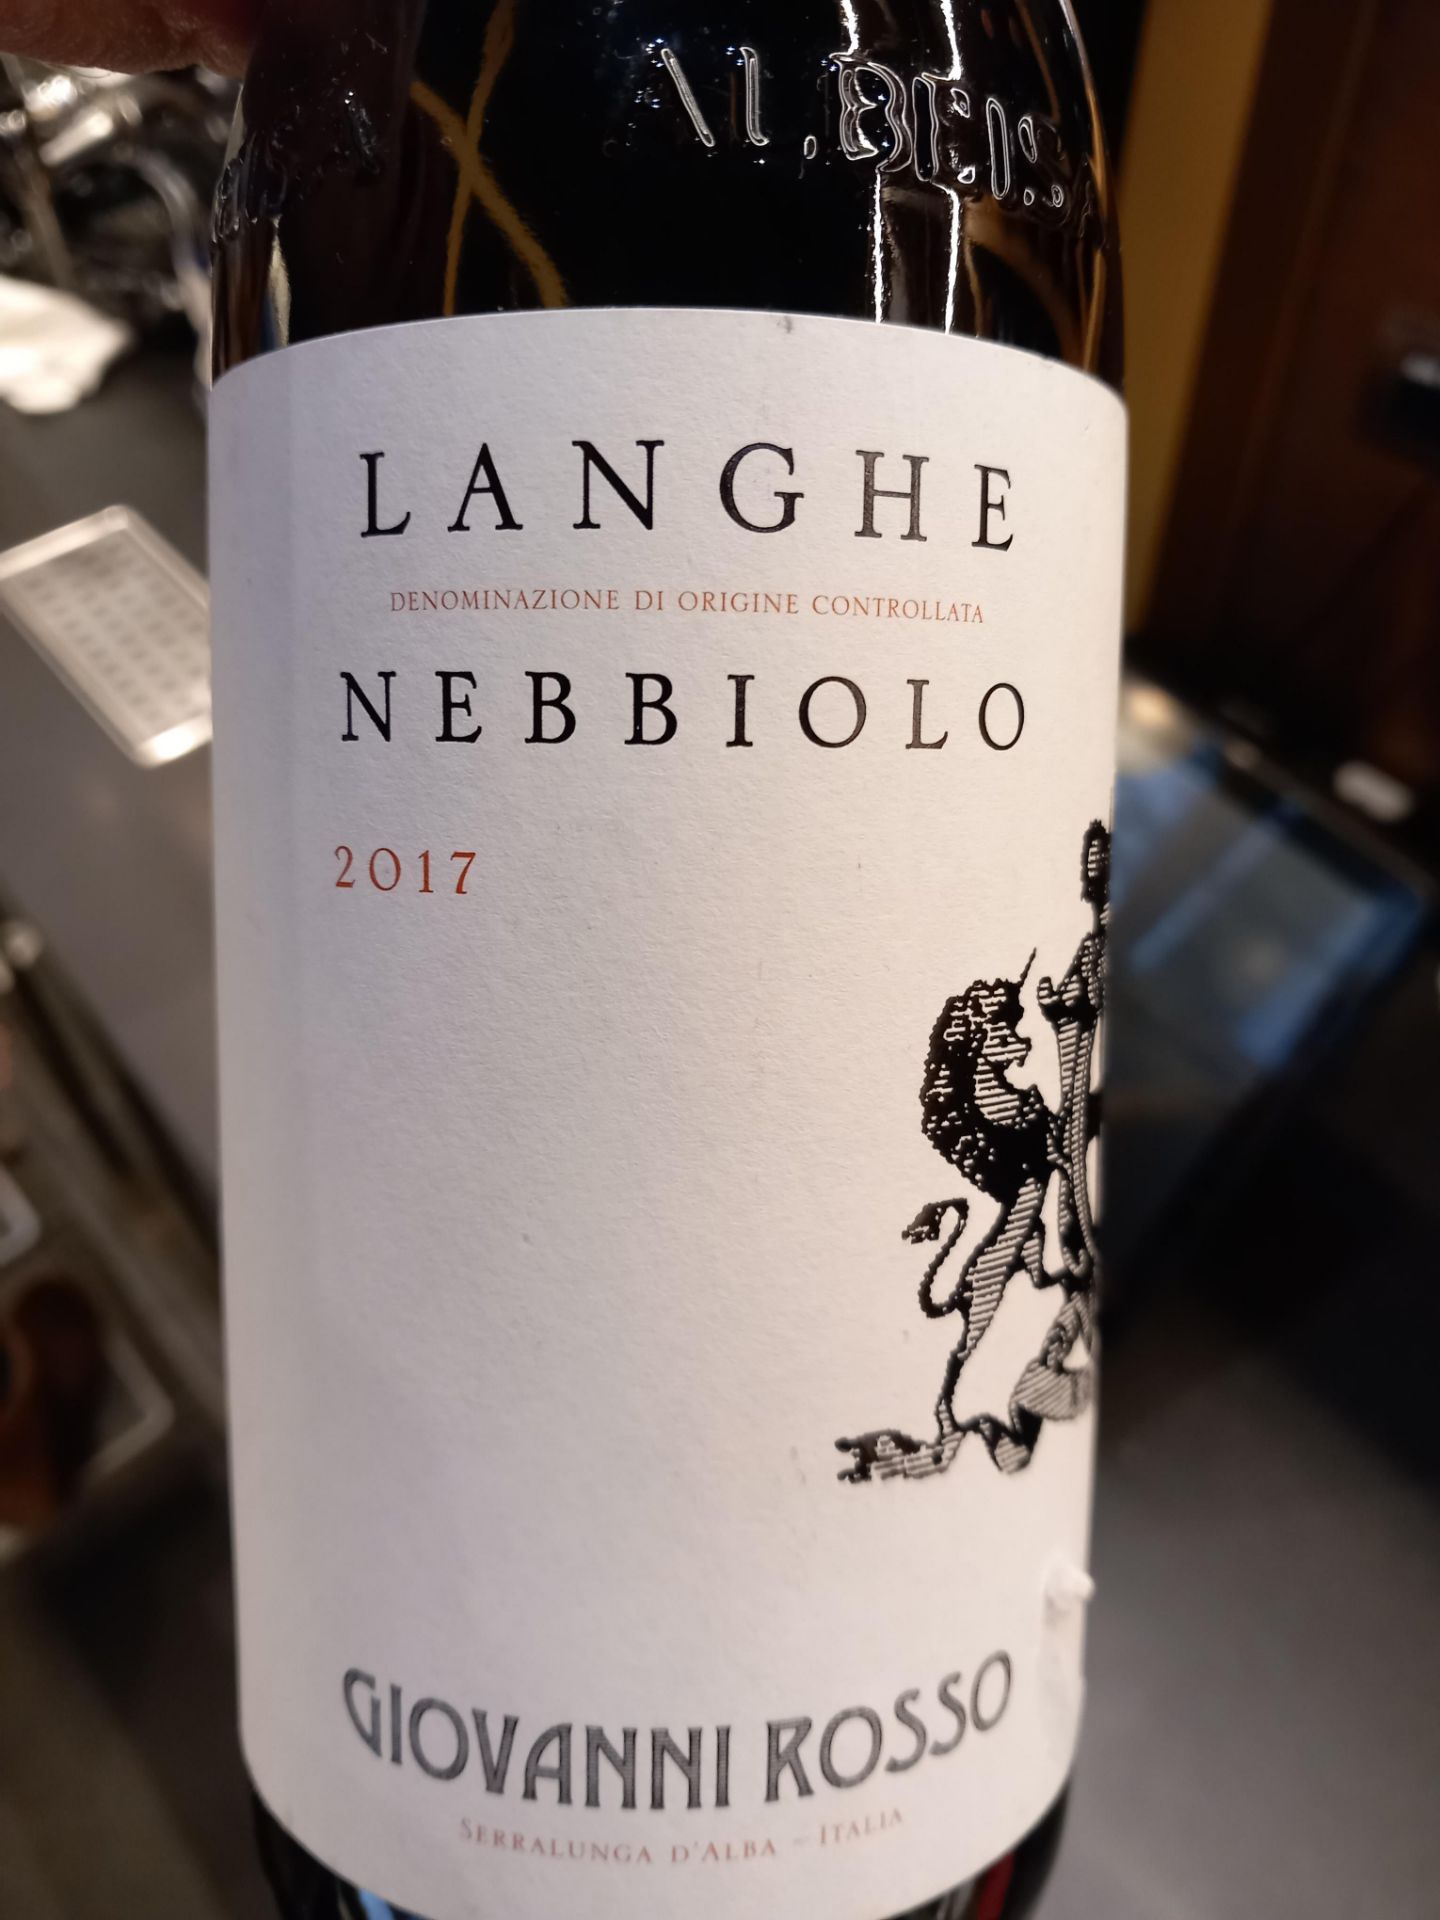 21x Langhe Nebbiolo 2017 - Image 3 of 4